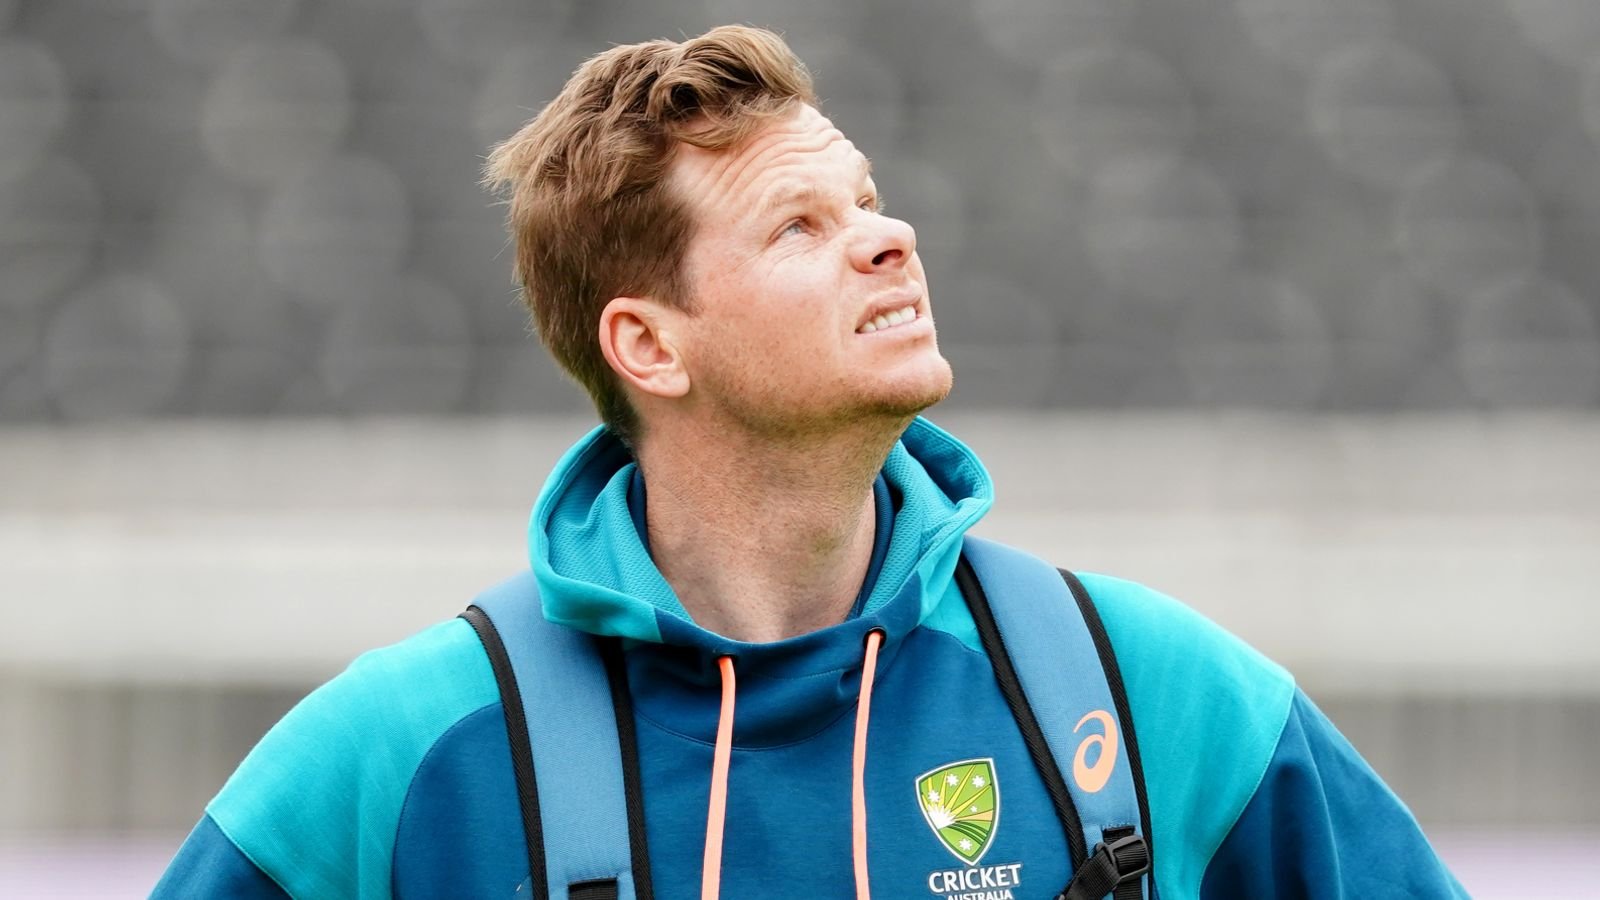 Steve Smith replaces David Warner as Australia Test opener for West Indies series and confirmed as ODI captain | Cricket News